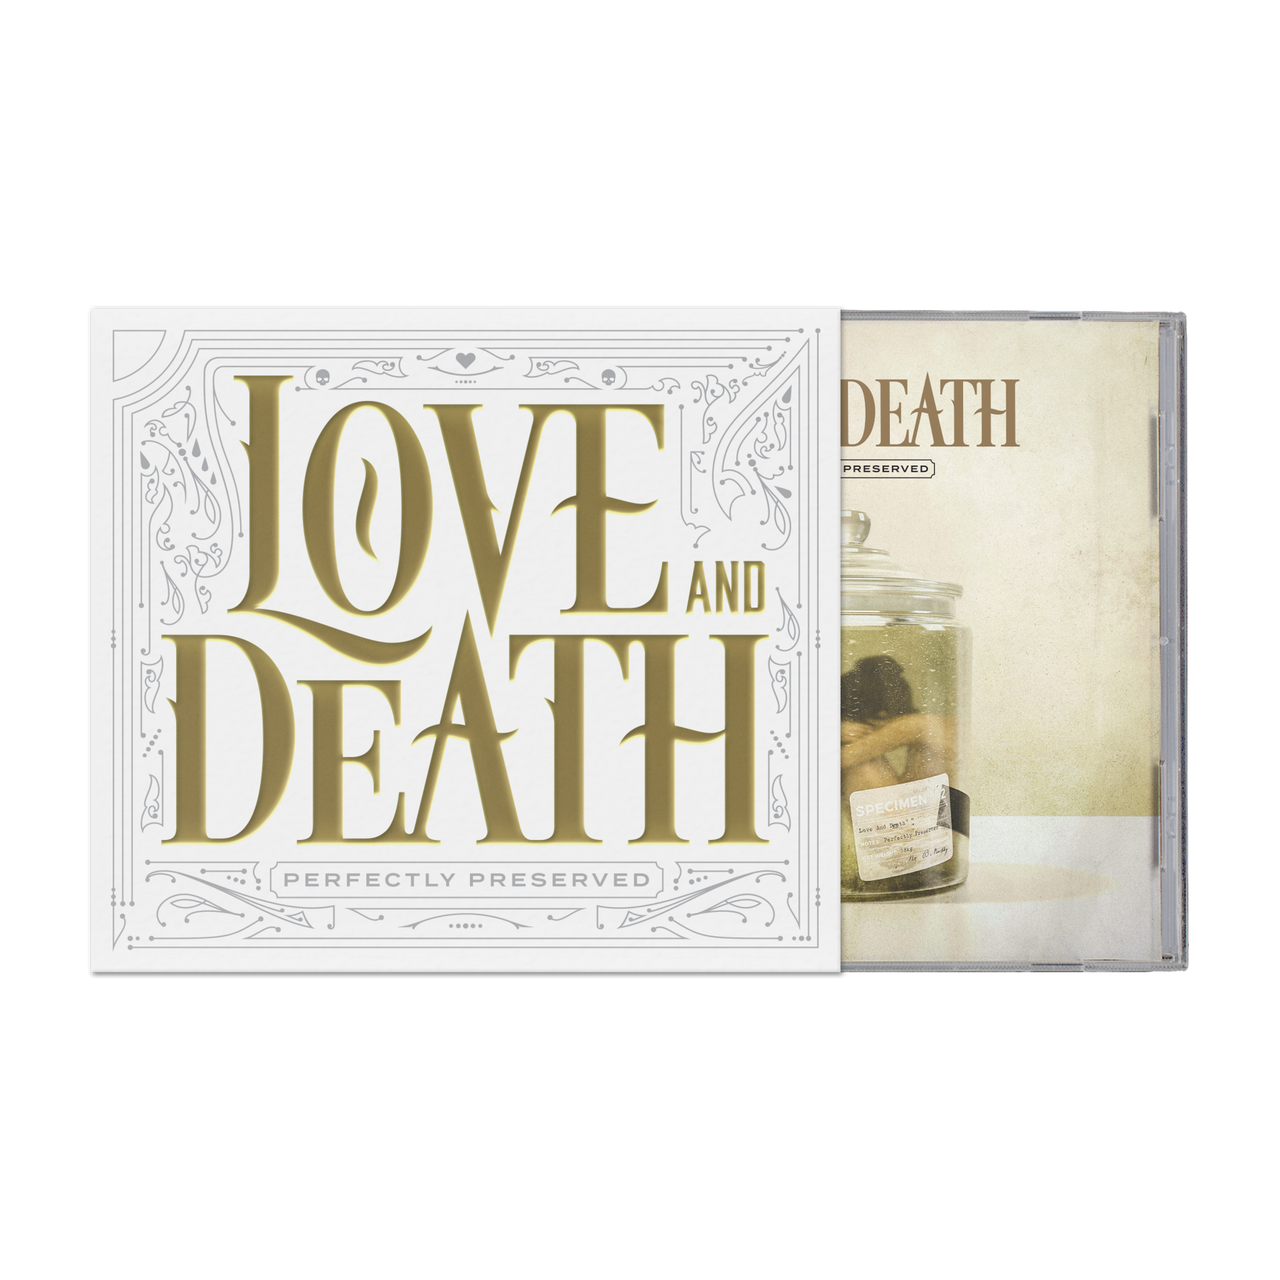 Love and Death: Perfectly Preserved Limited Edition Deluxe CD